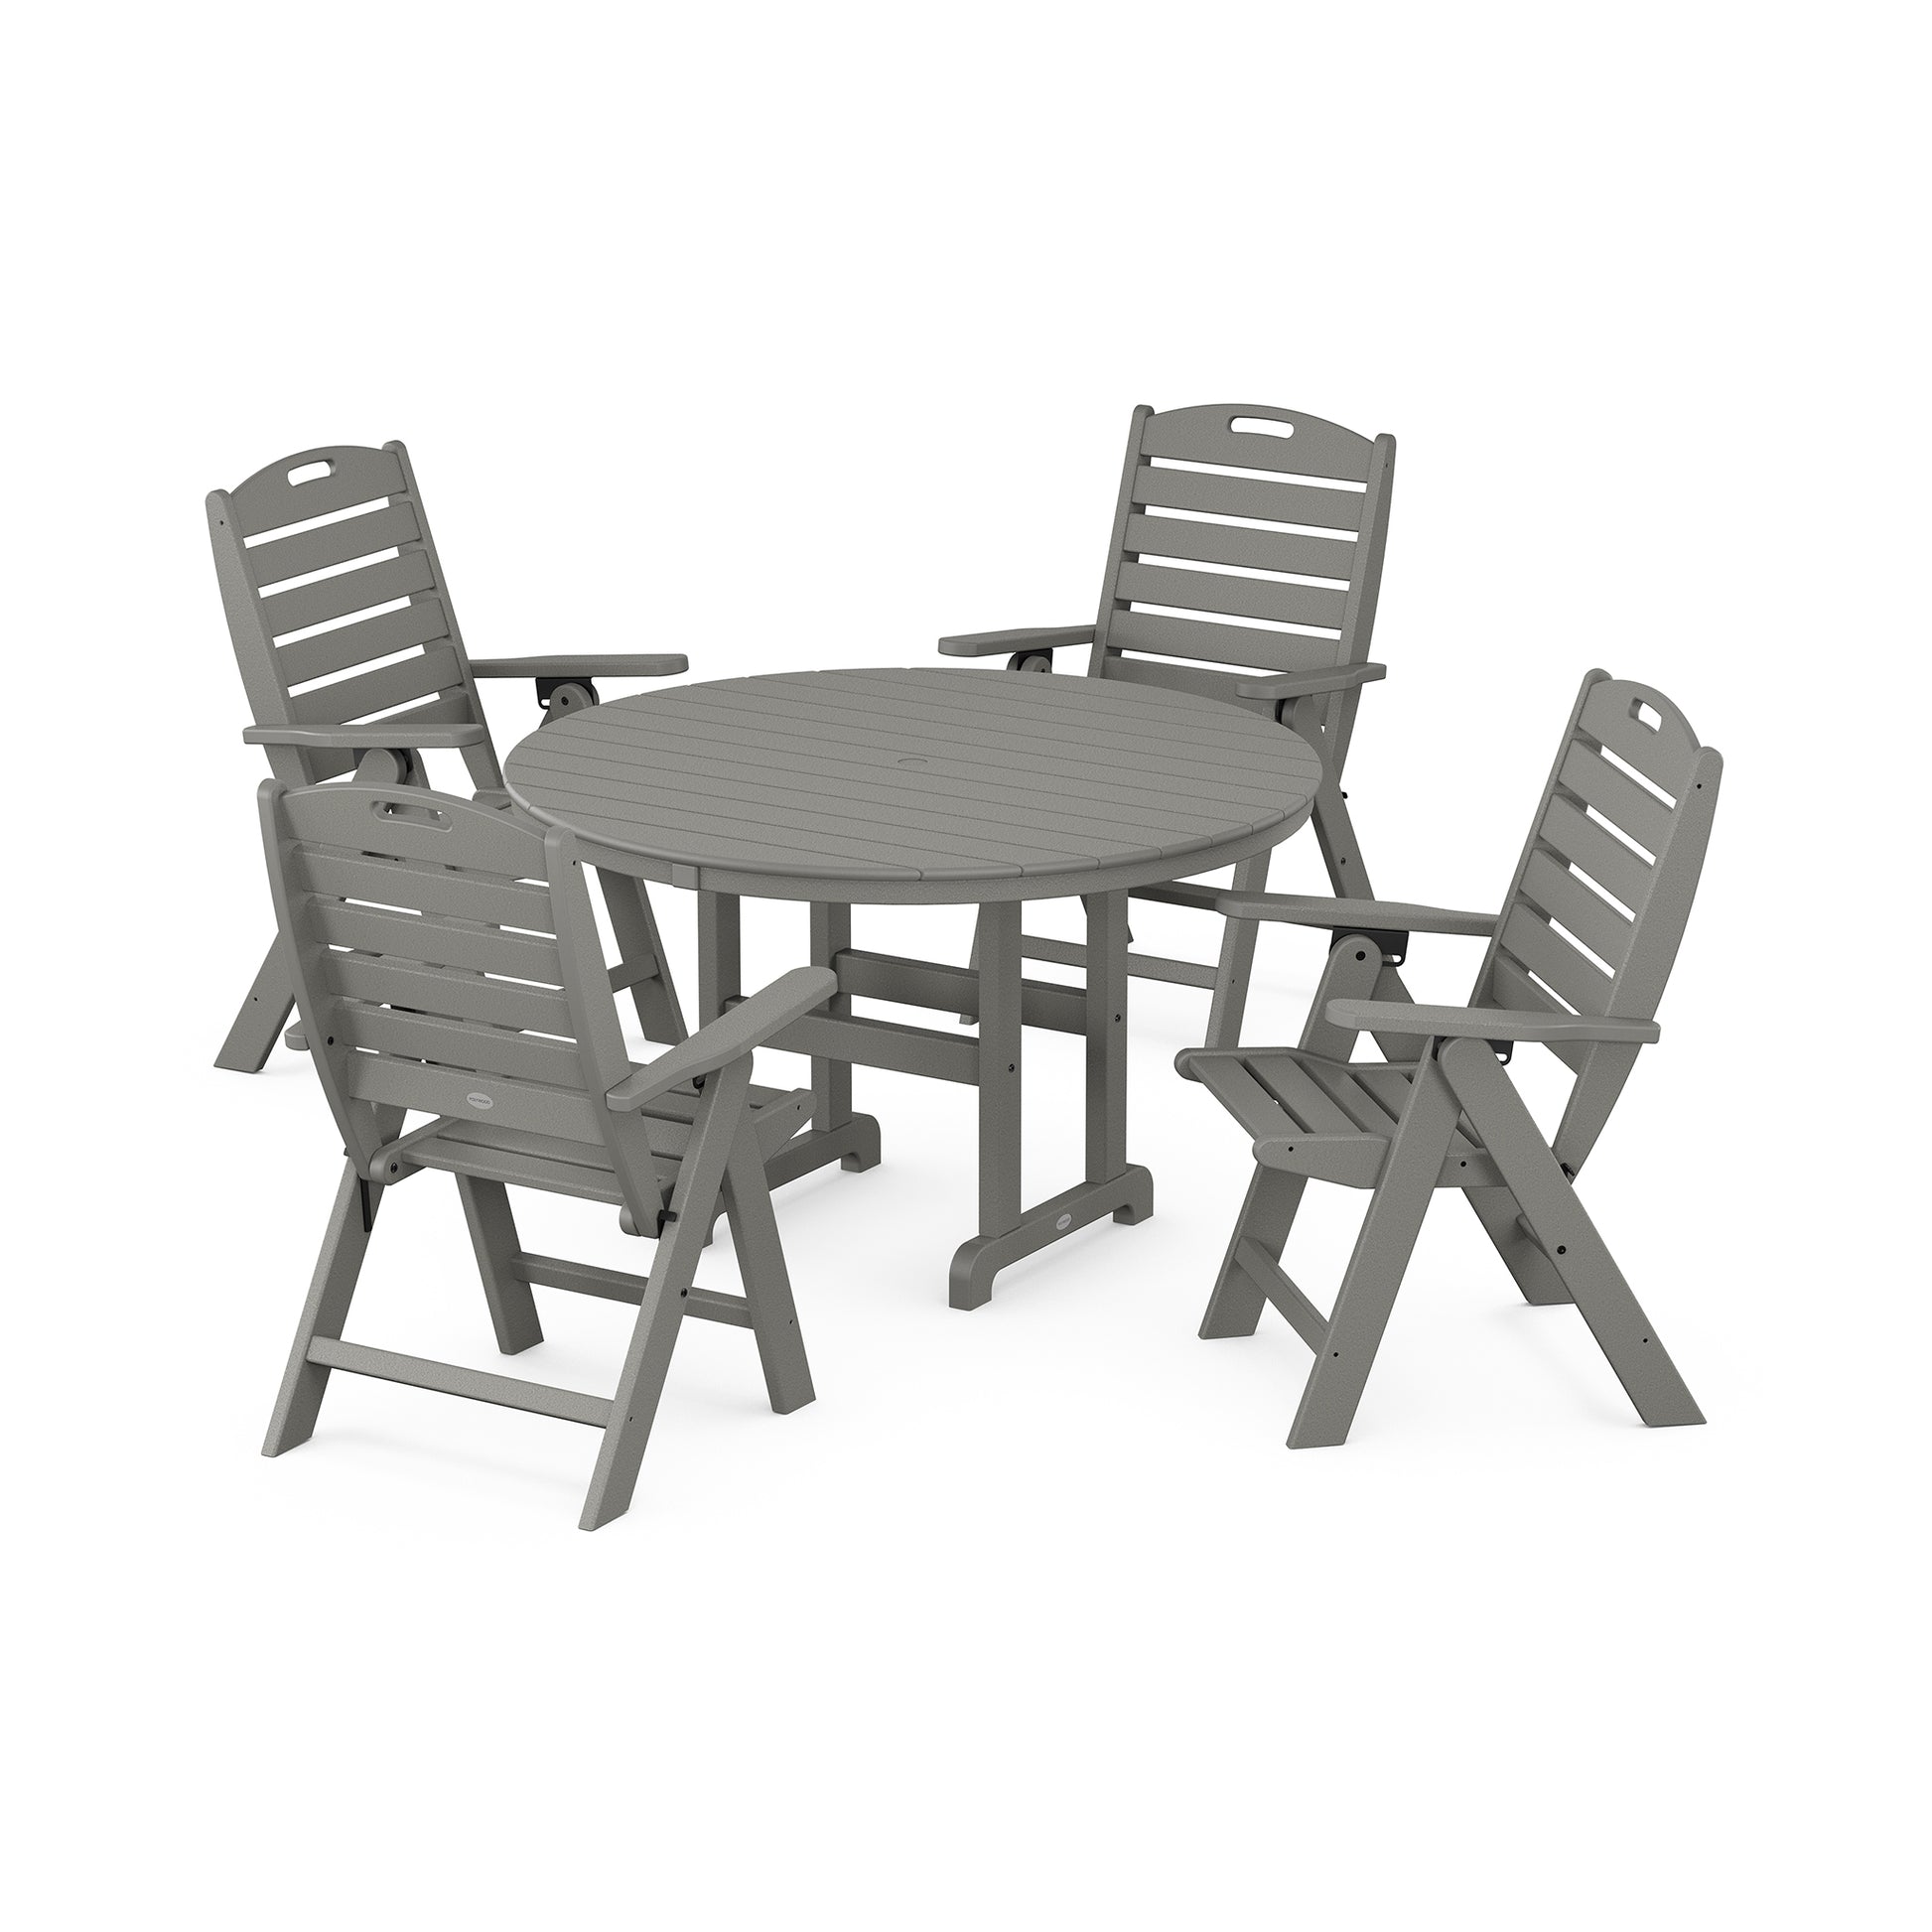 A five-piece POLYWOOD® Nautical 5-Piece Dining Set featuring a round table and four chairs made of gray plastic, designed in a slatted style. The chairs are foldable.